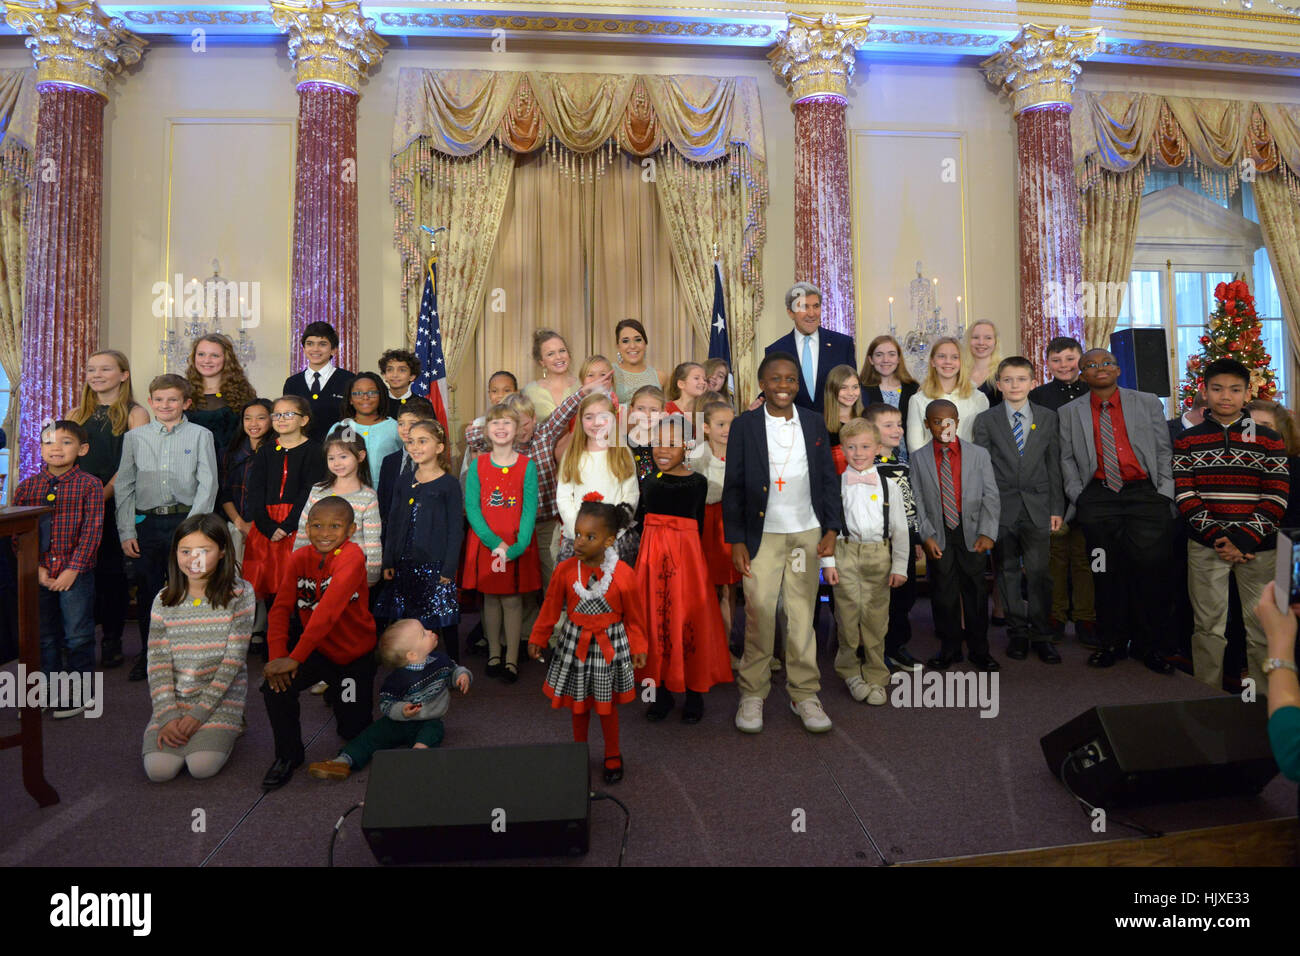 U.S. Secretary of State John Kerry poses for a photo with children of U.S. government employees on assignment at unaccompanied posts around the world at the annual Diplomacy at Home for the Holidays Reception, at the U.S. Department of State in Washington, D.C., on December 13, 2016. Stock Photo